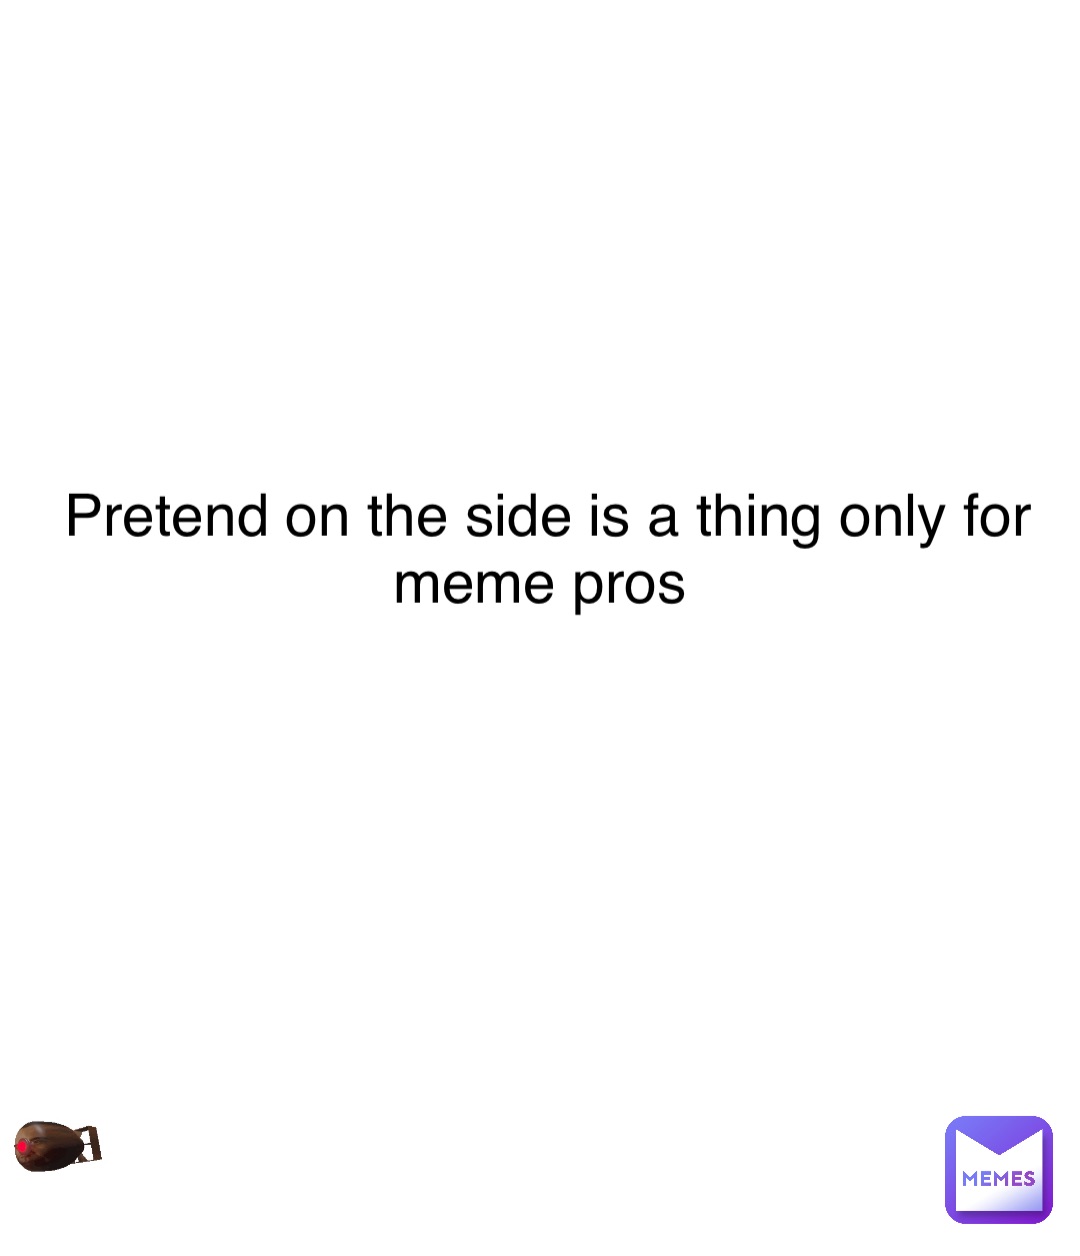 Double tap to edit Pretend on the side is a thing only for meme pros